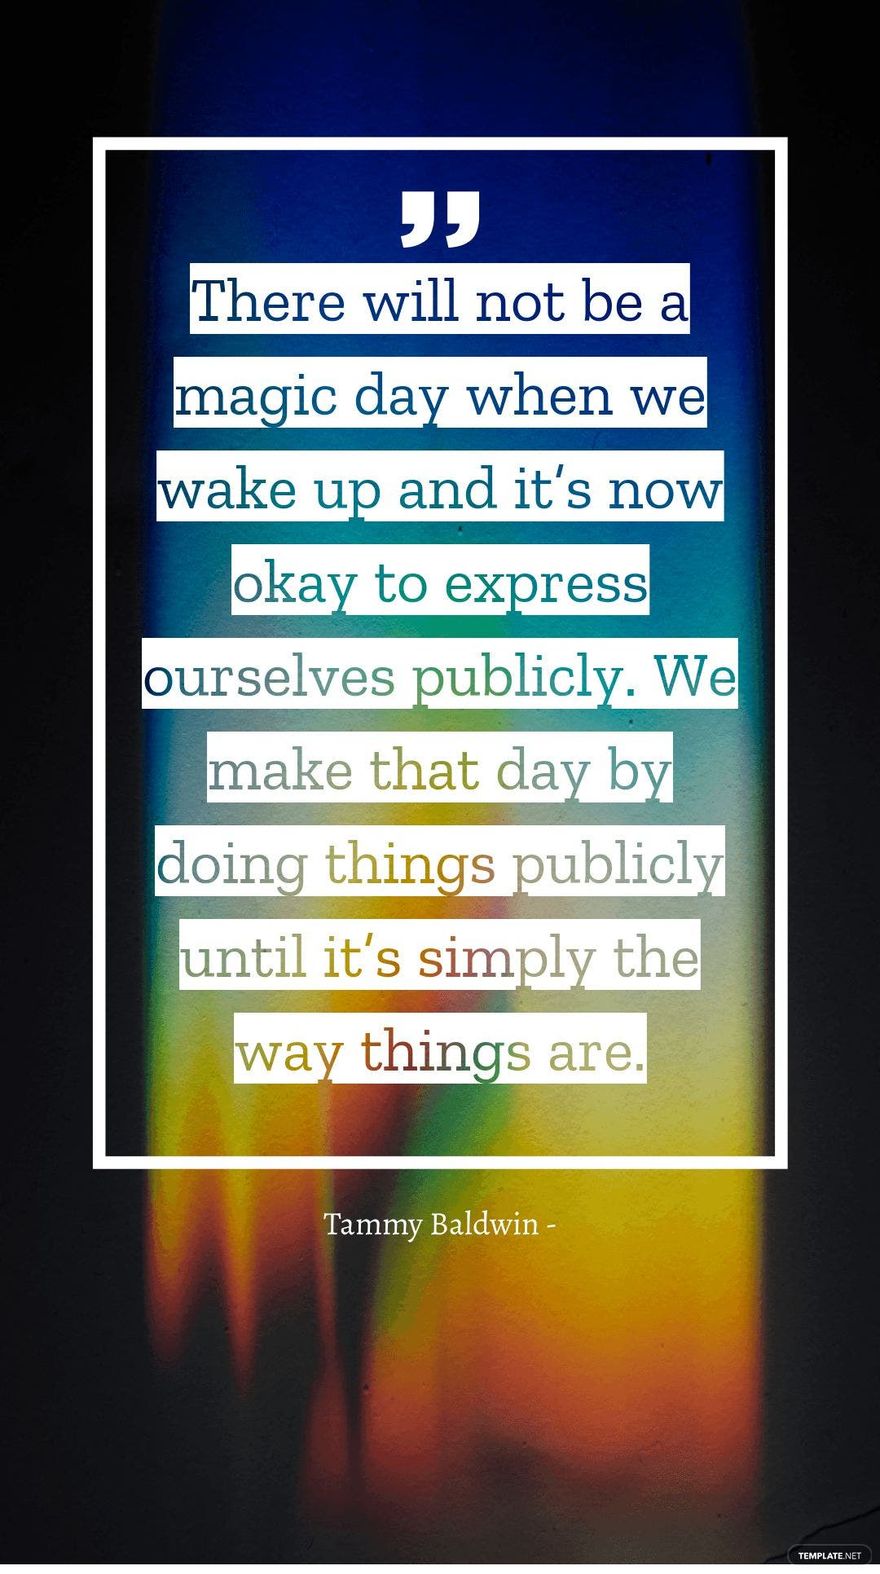 Tammy Baldwin - There will not be a magic day when we wake up and it’s now okay to express ourselves publicly. We make that day by doing things publicly until it’s simply the way things are.